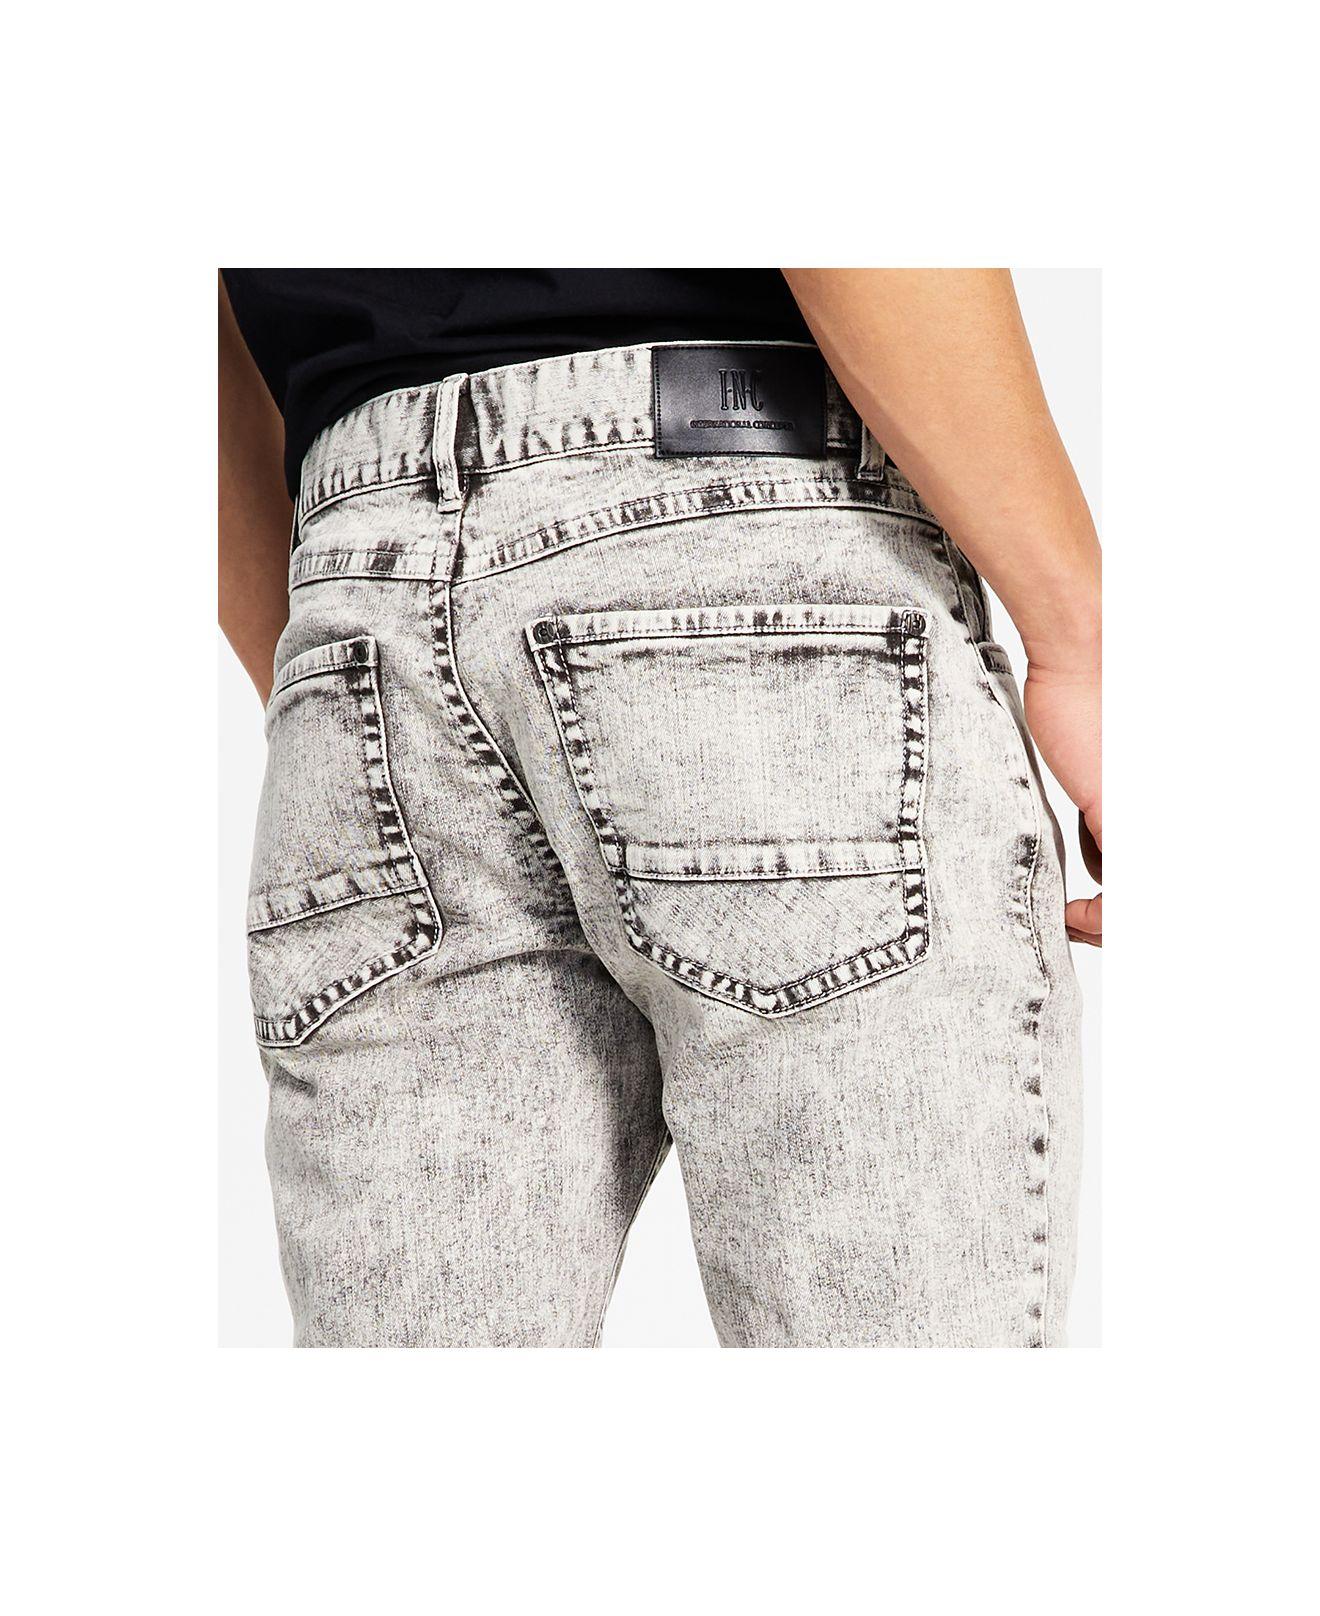 INC Mens Gray Ripped Embroidered Denim Skinny Jeans 32/30 BHFO 4685 